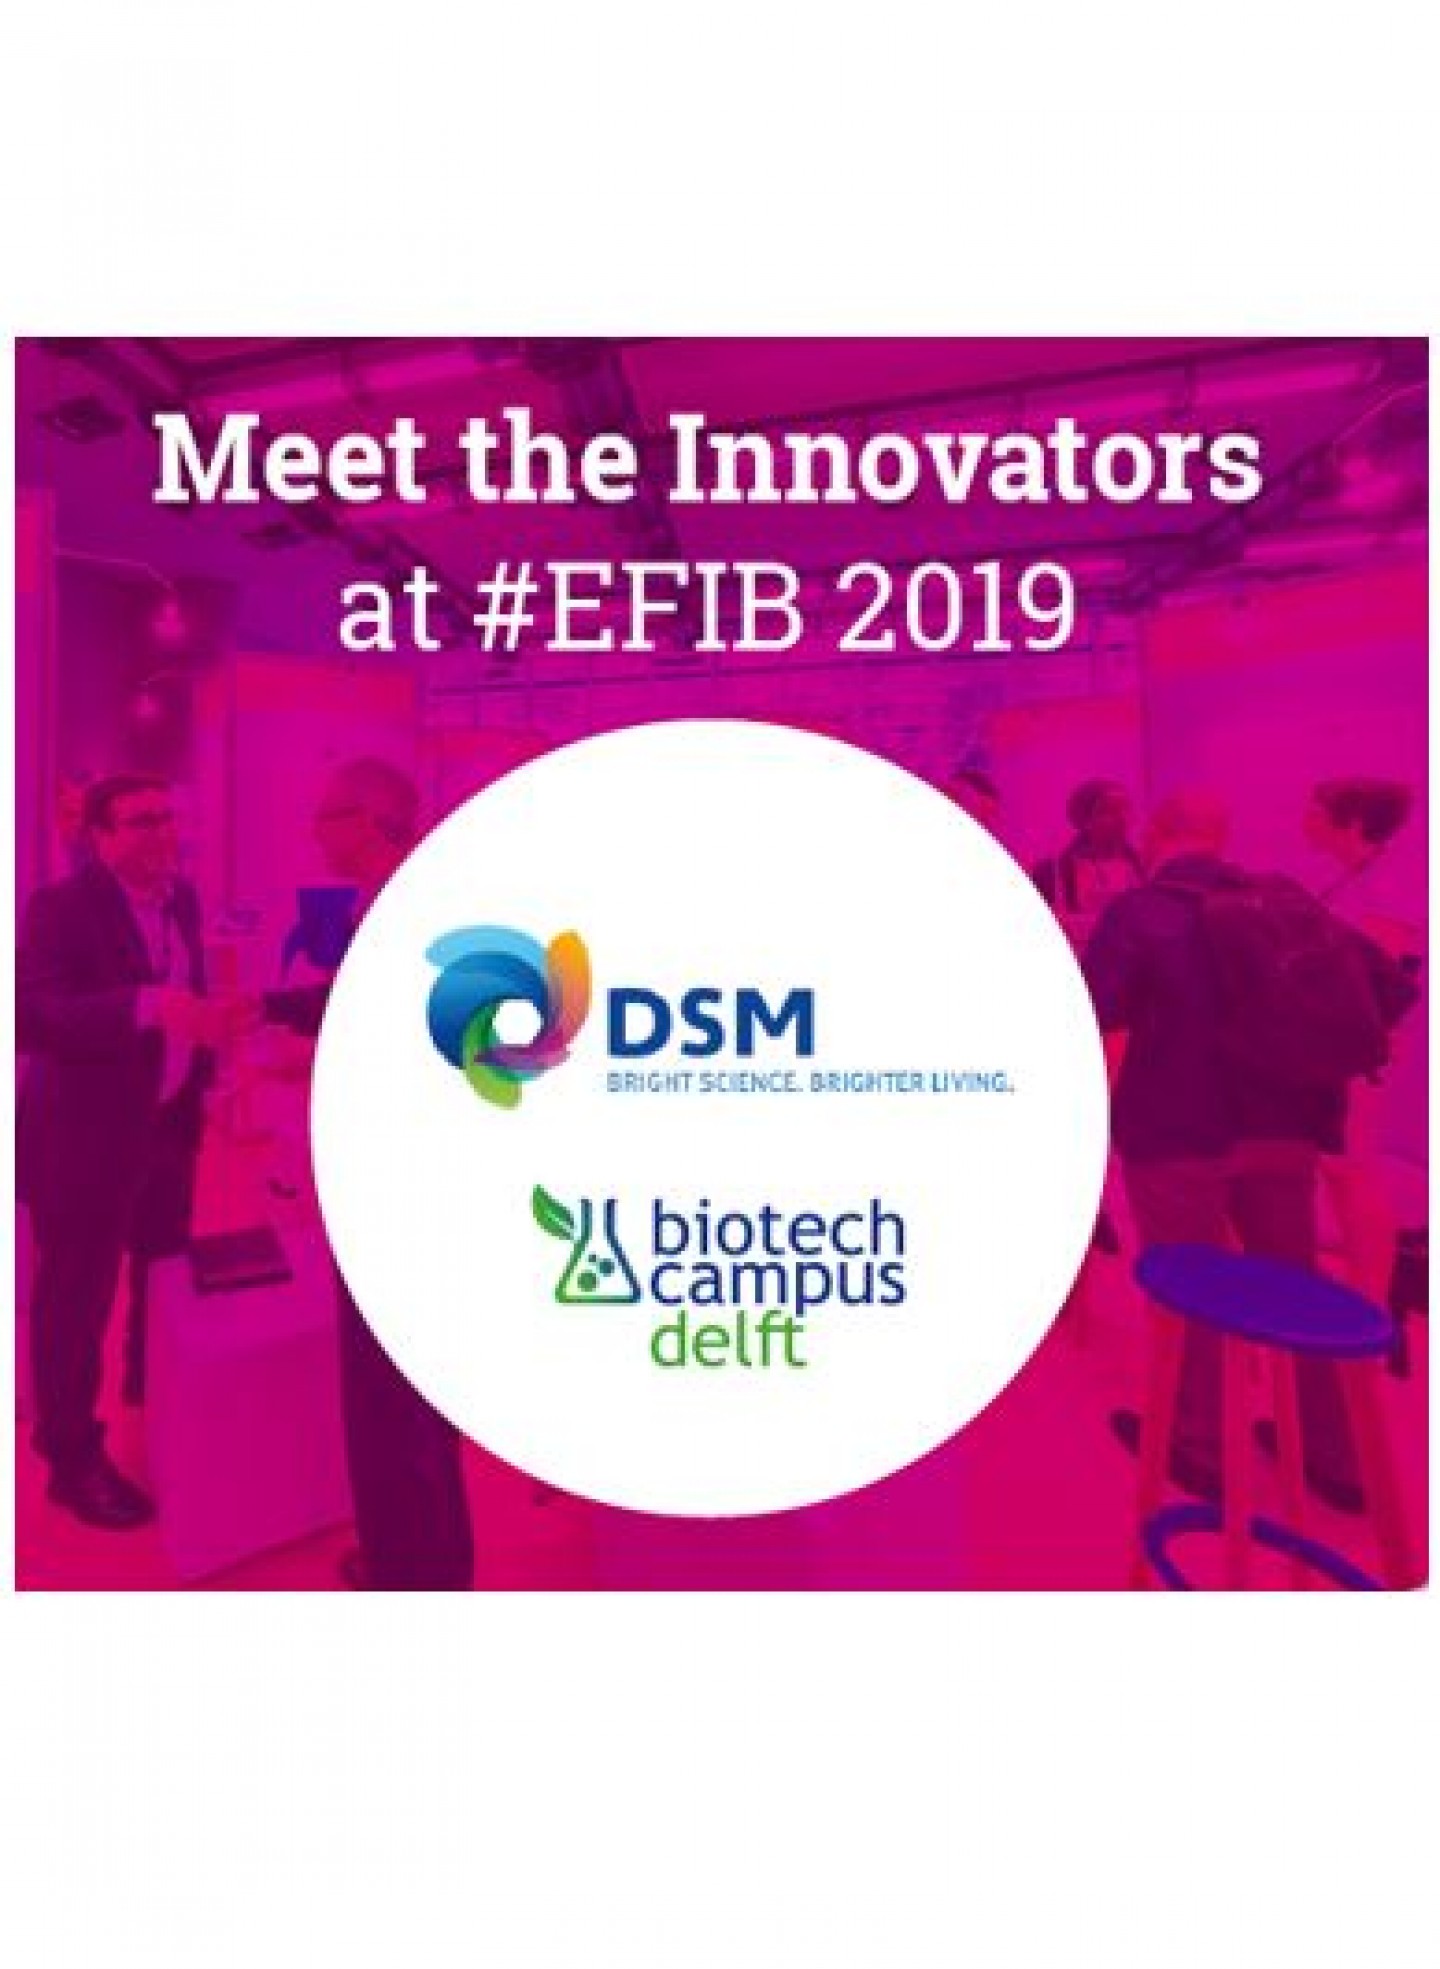 Explore and connect at EFIB 2019